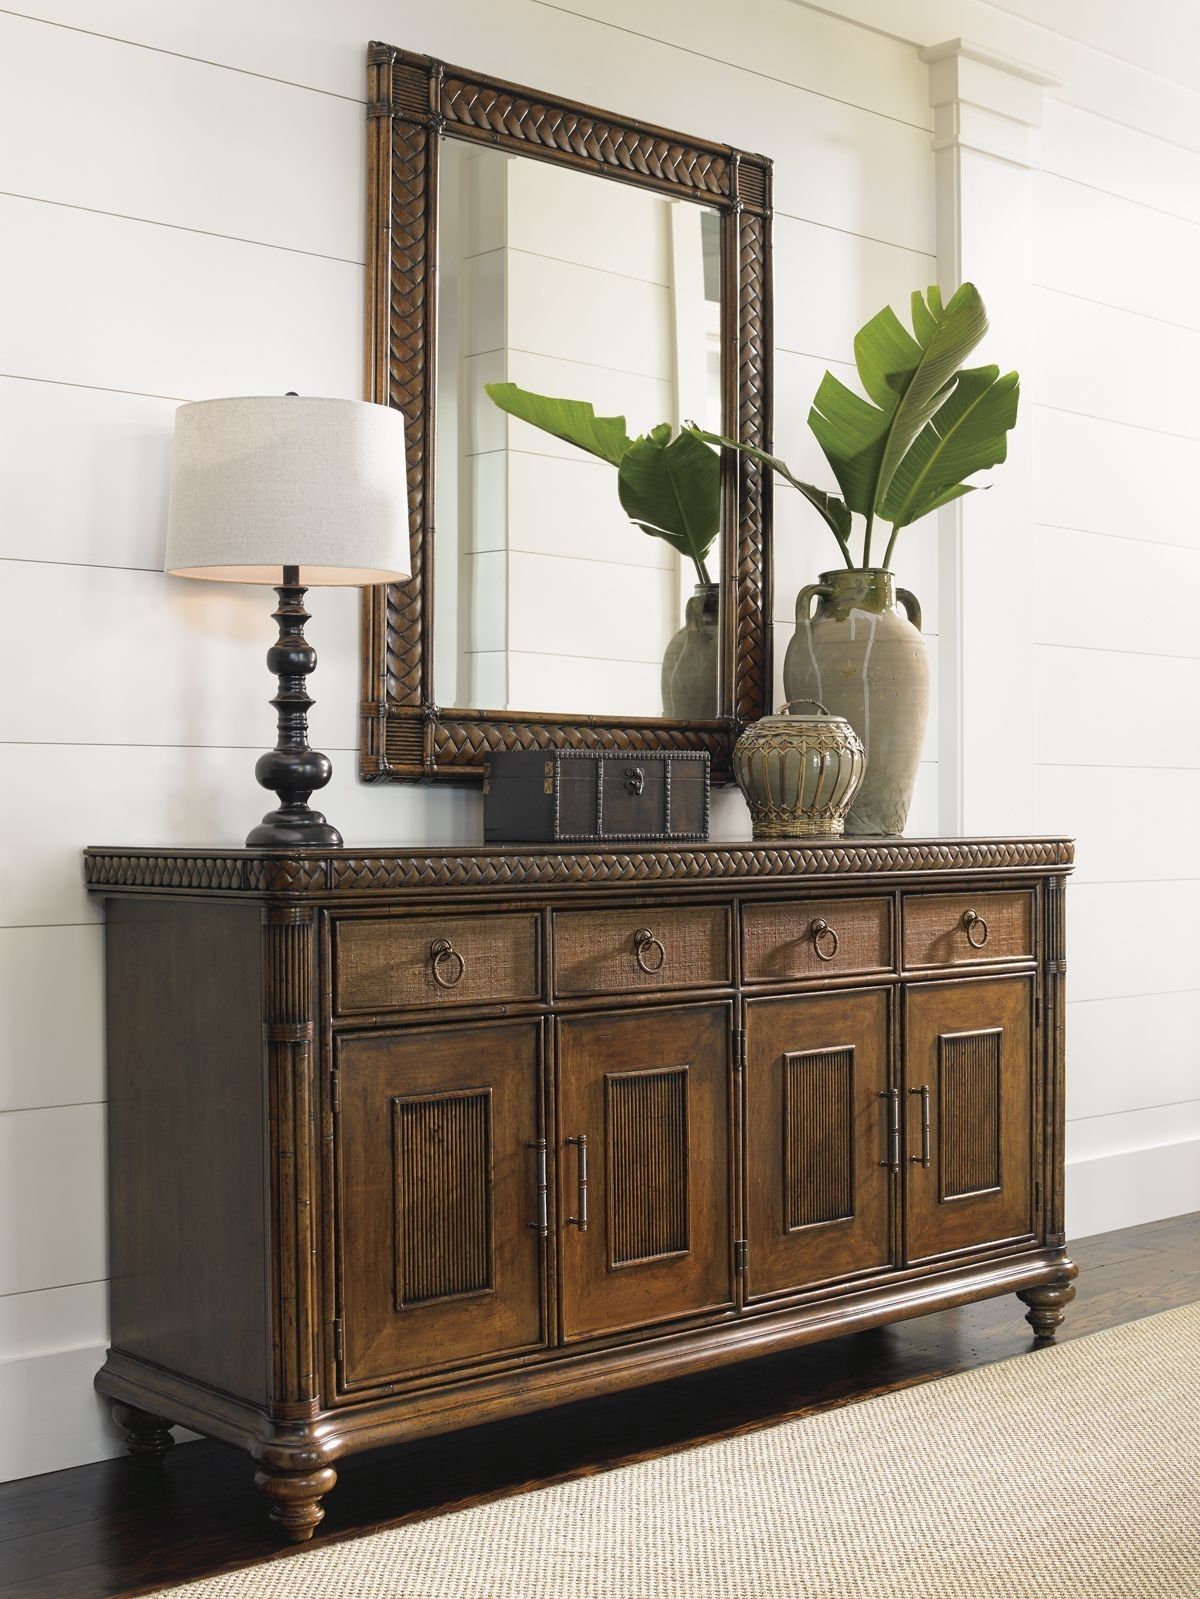 Tommy Bahama Bali Hai Sunrise Landscape Mirror With Braiding With Rani 4 Door Sideboards (View 13 of 30)